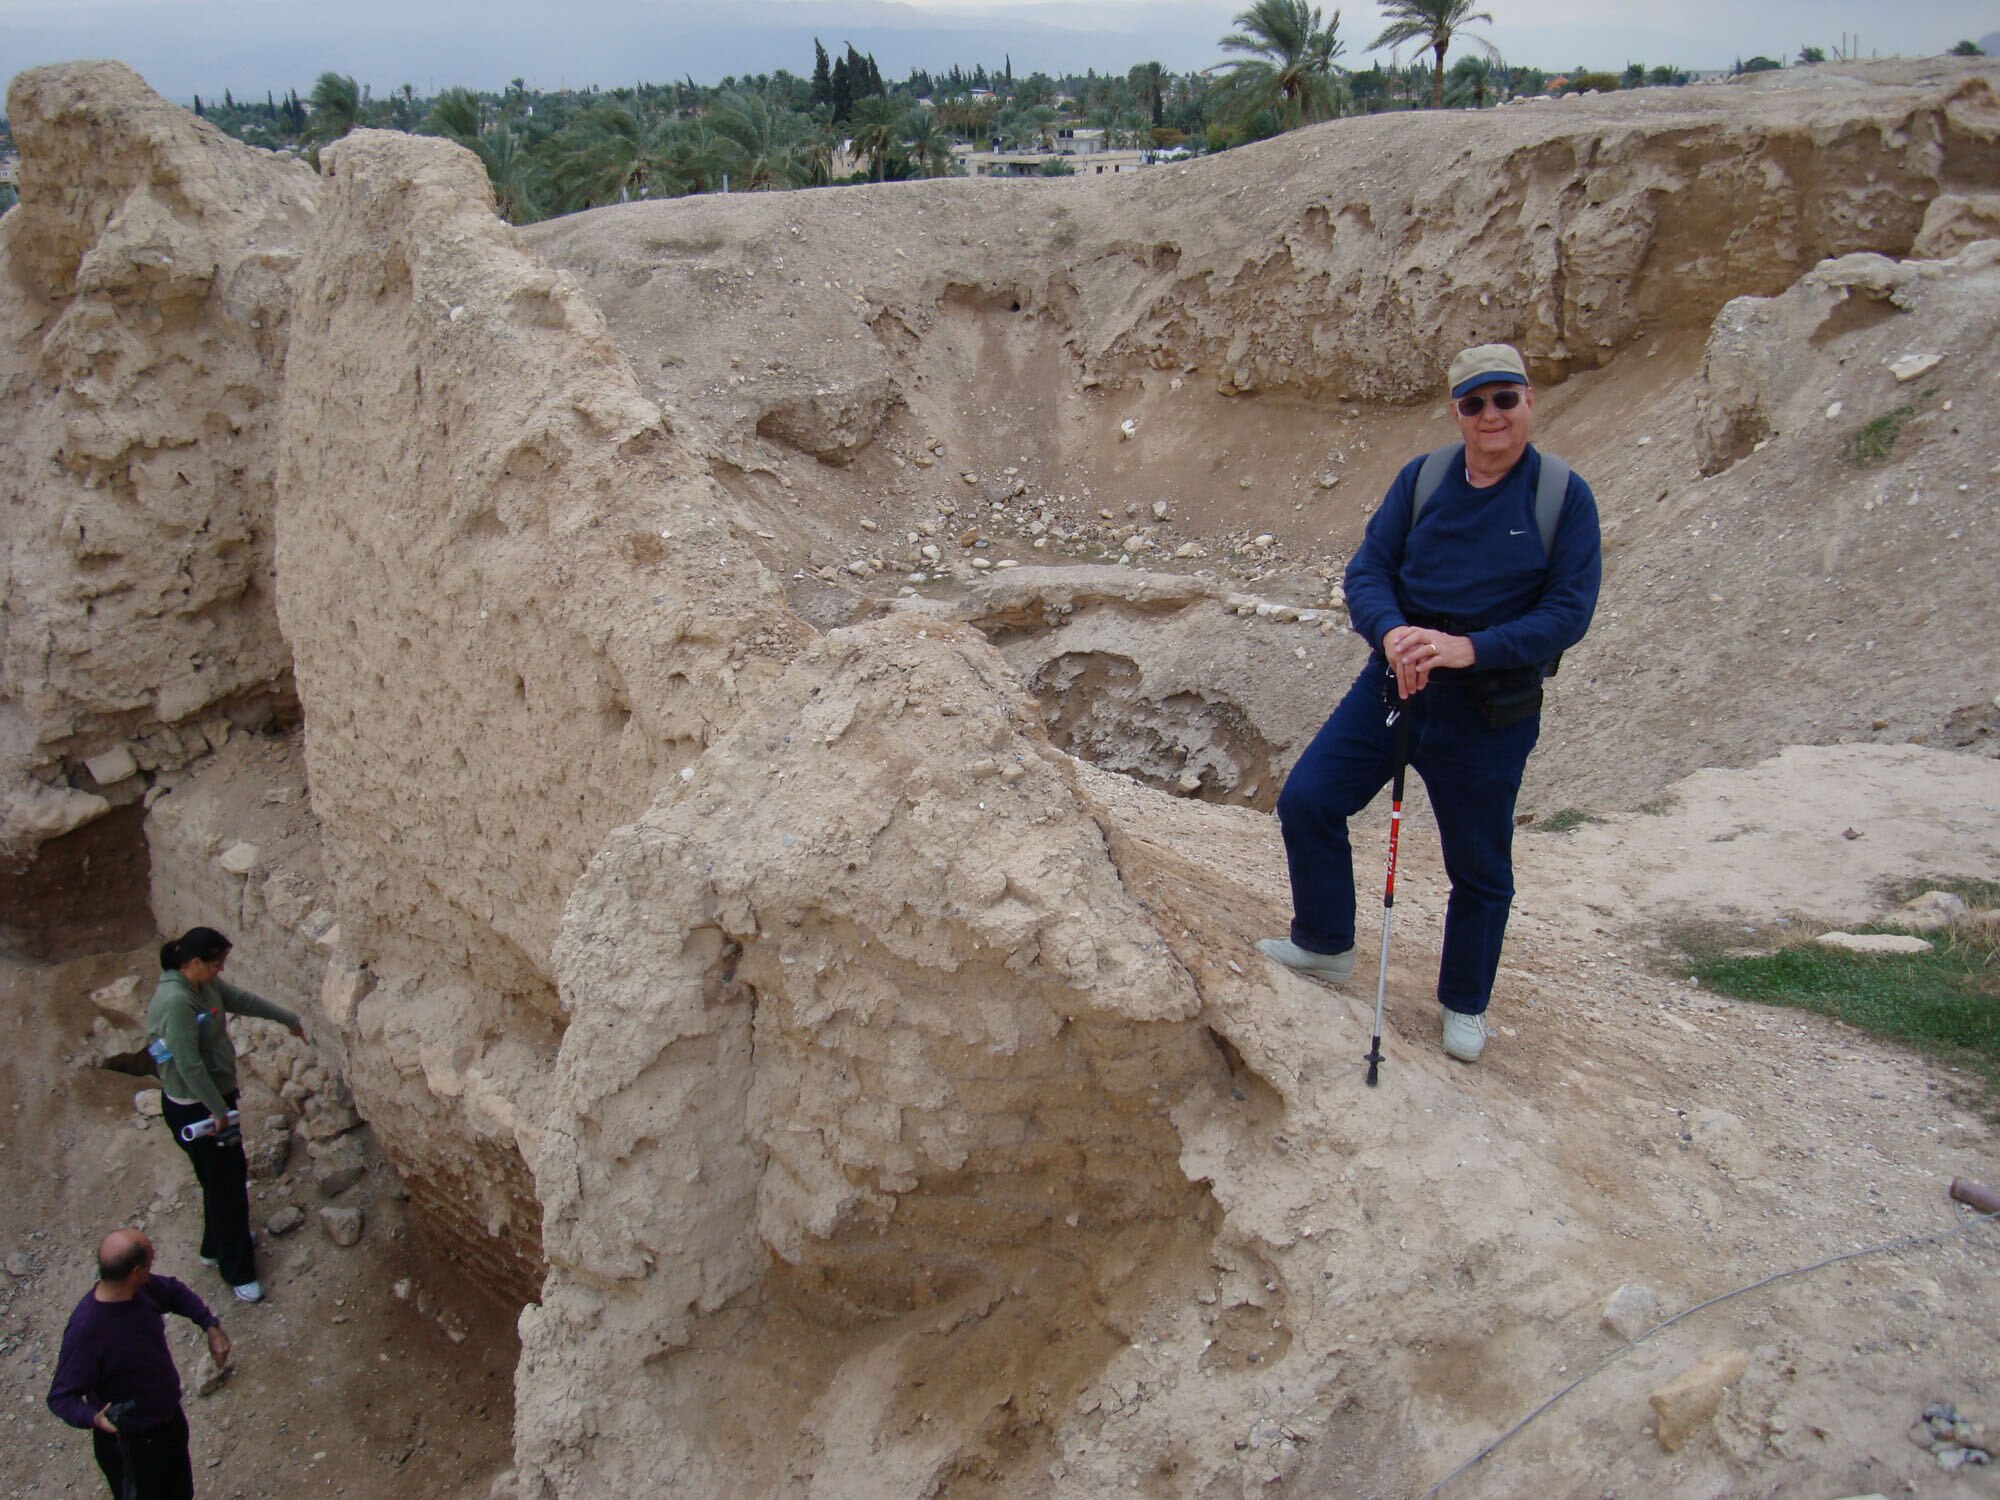 Jim Johnson stands near the 4,000 year-old Walls of Jericho. (Photo provided)